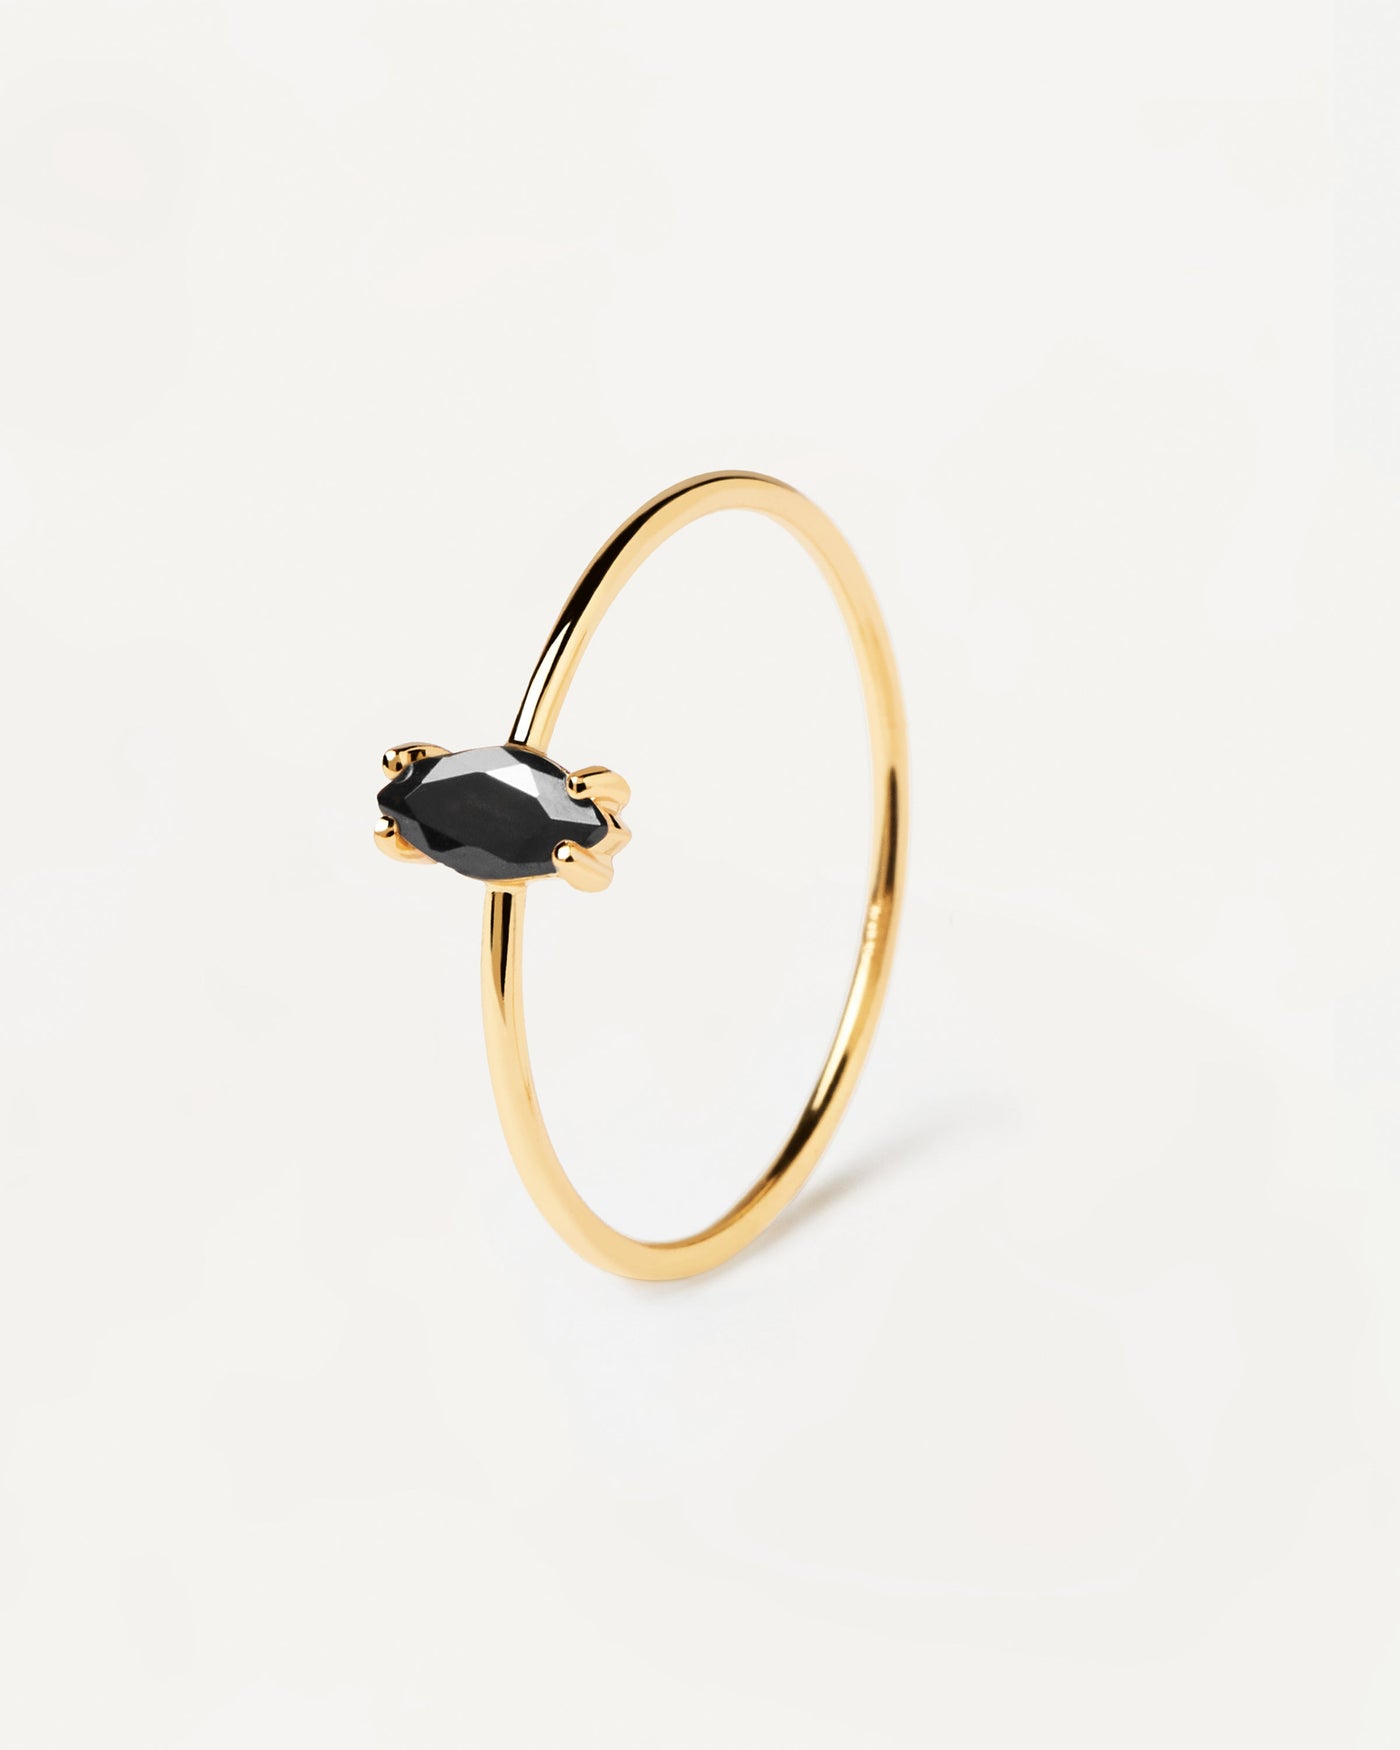 2023 Selection | Black India Ring. Elegant marquise cut black zirconia prong-set on a slim 18k gold plated ring. Get the latest arrival from PDPAOLA. Place your order safely and get this Best Seller. Free Shipping.